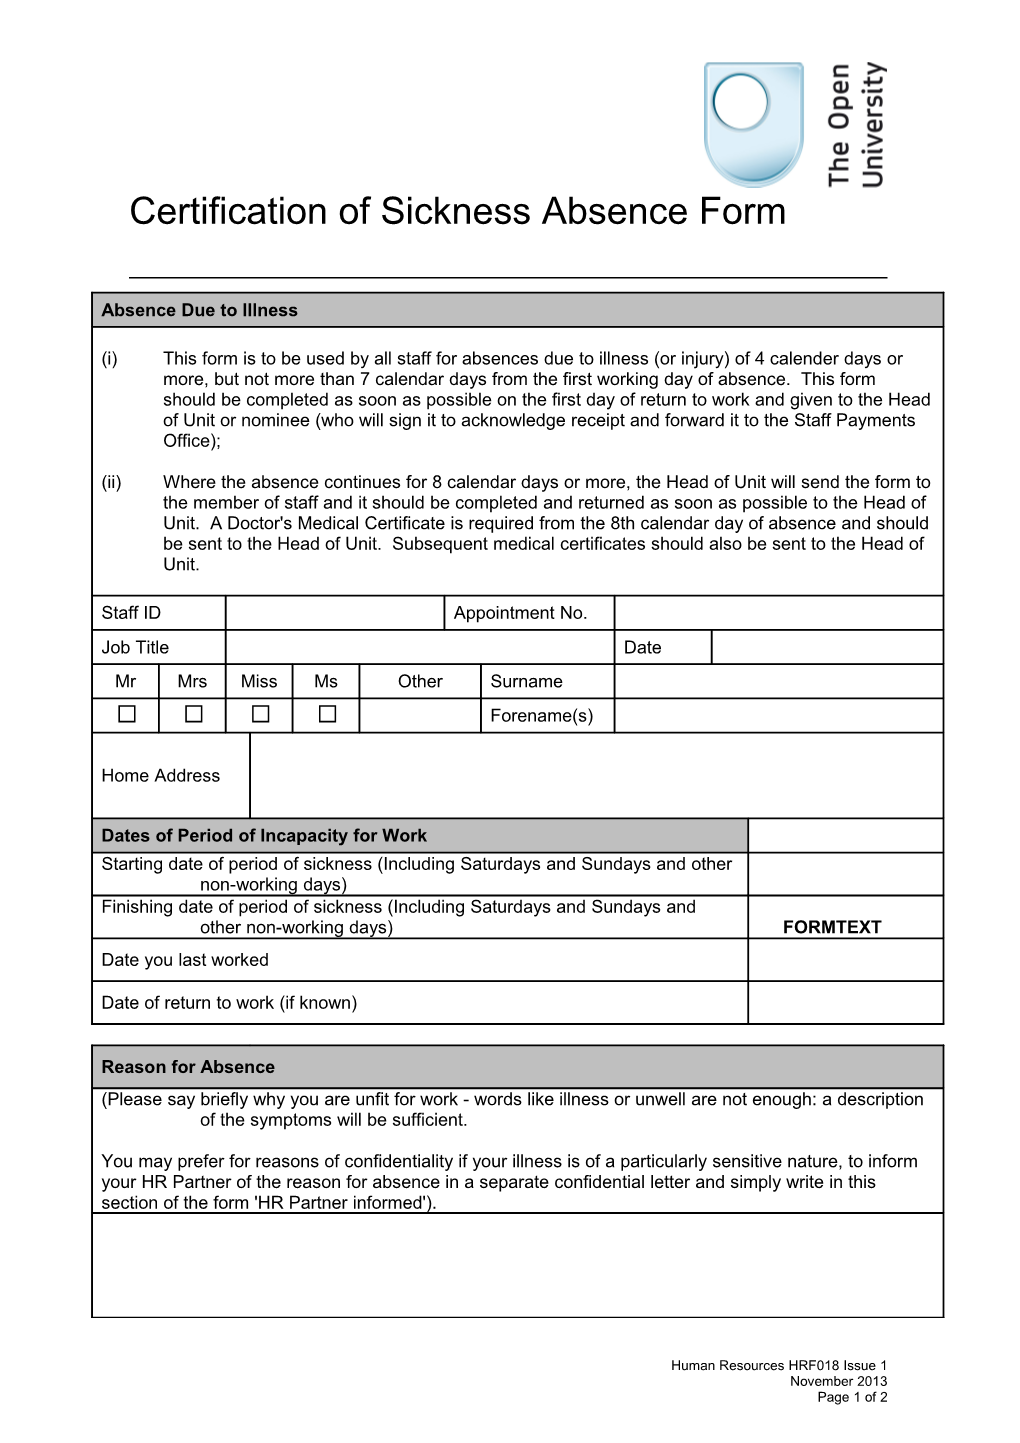 Certification of Sickness Absence Form HRF018